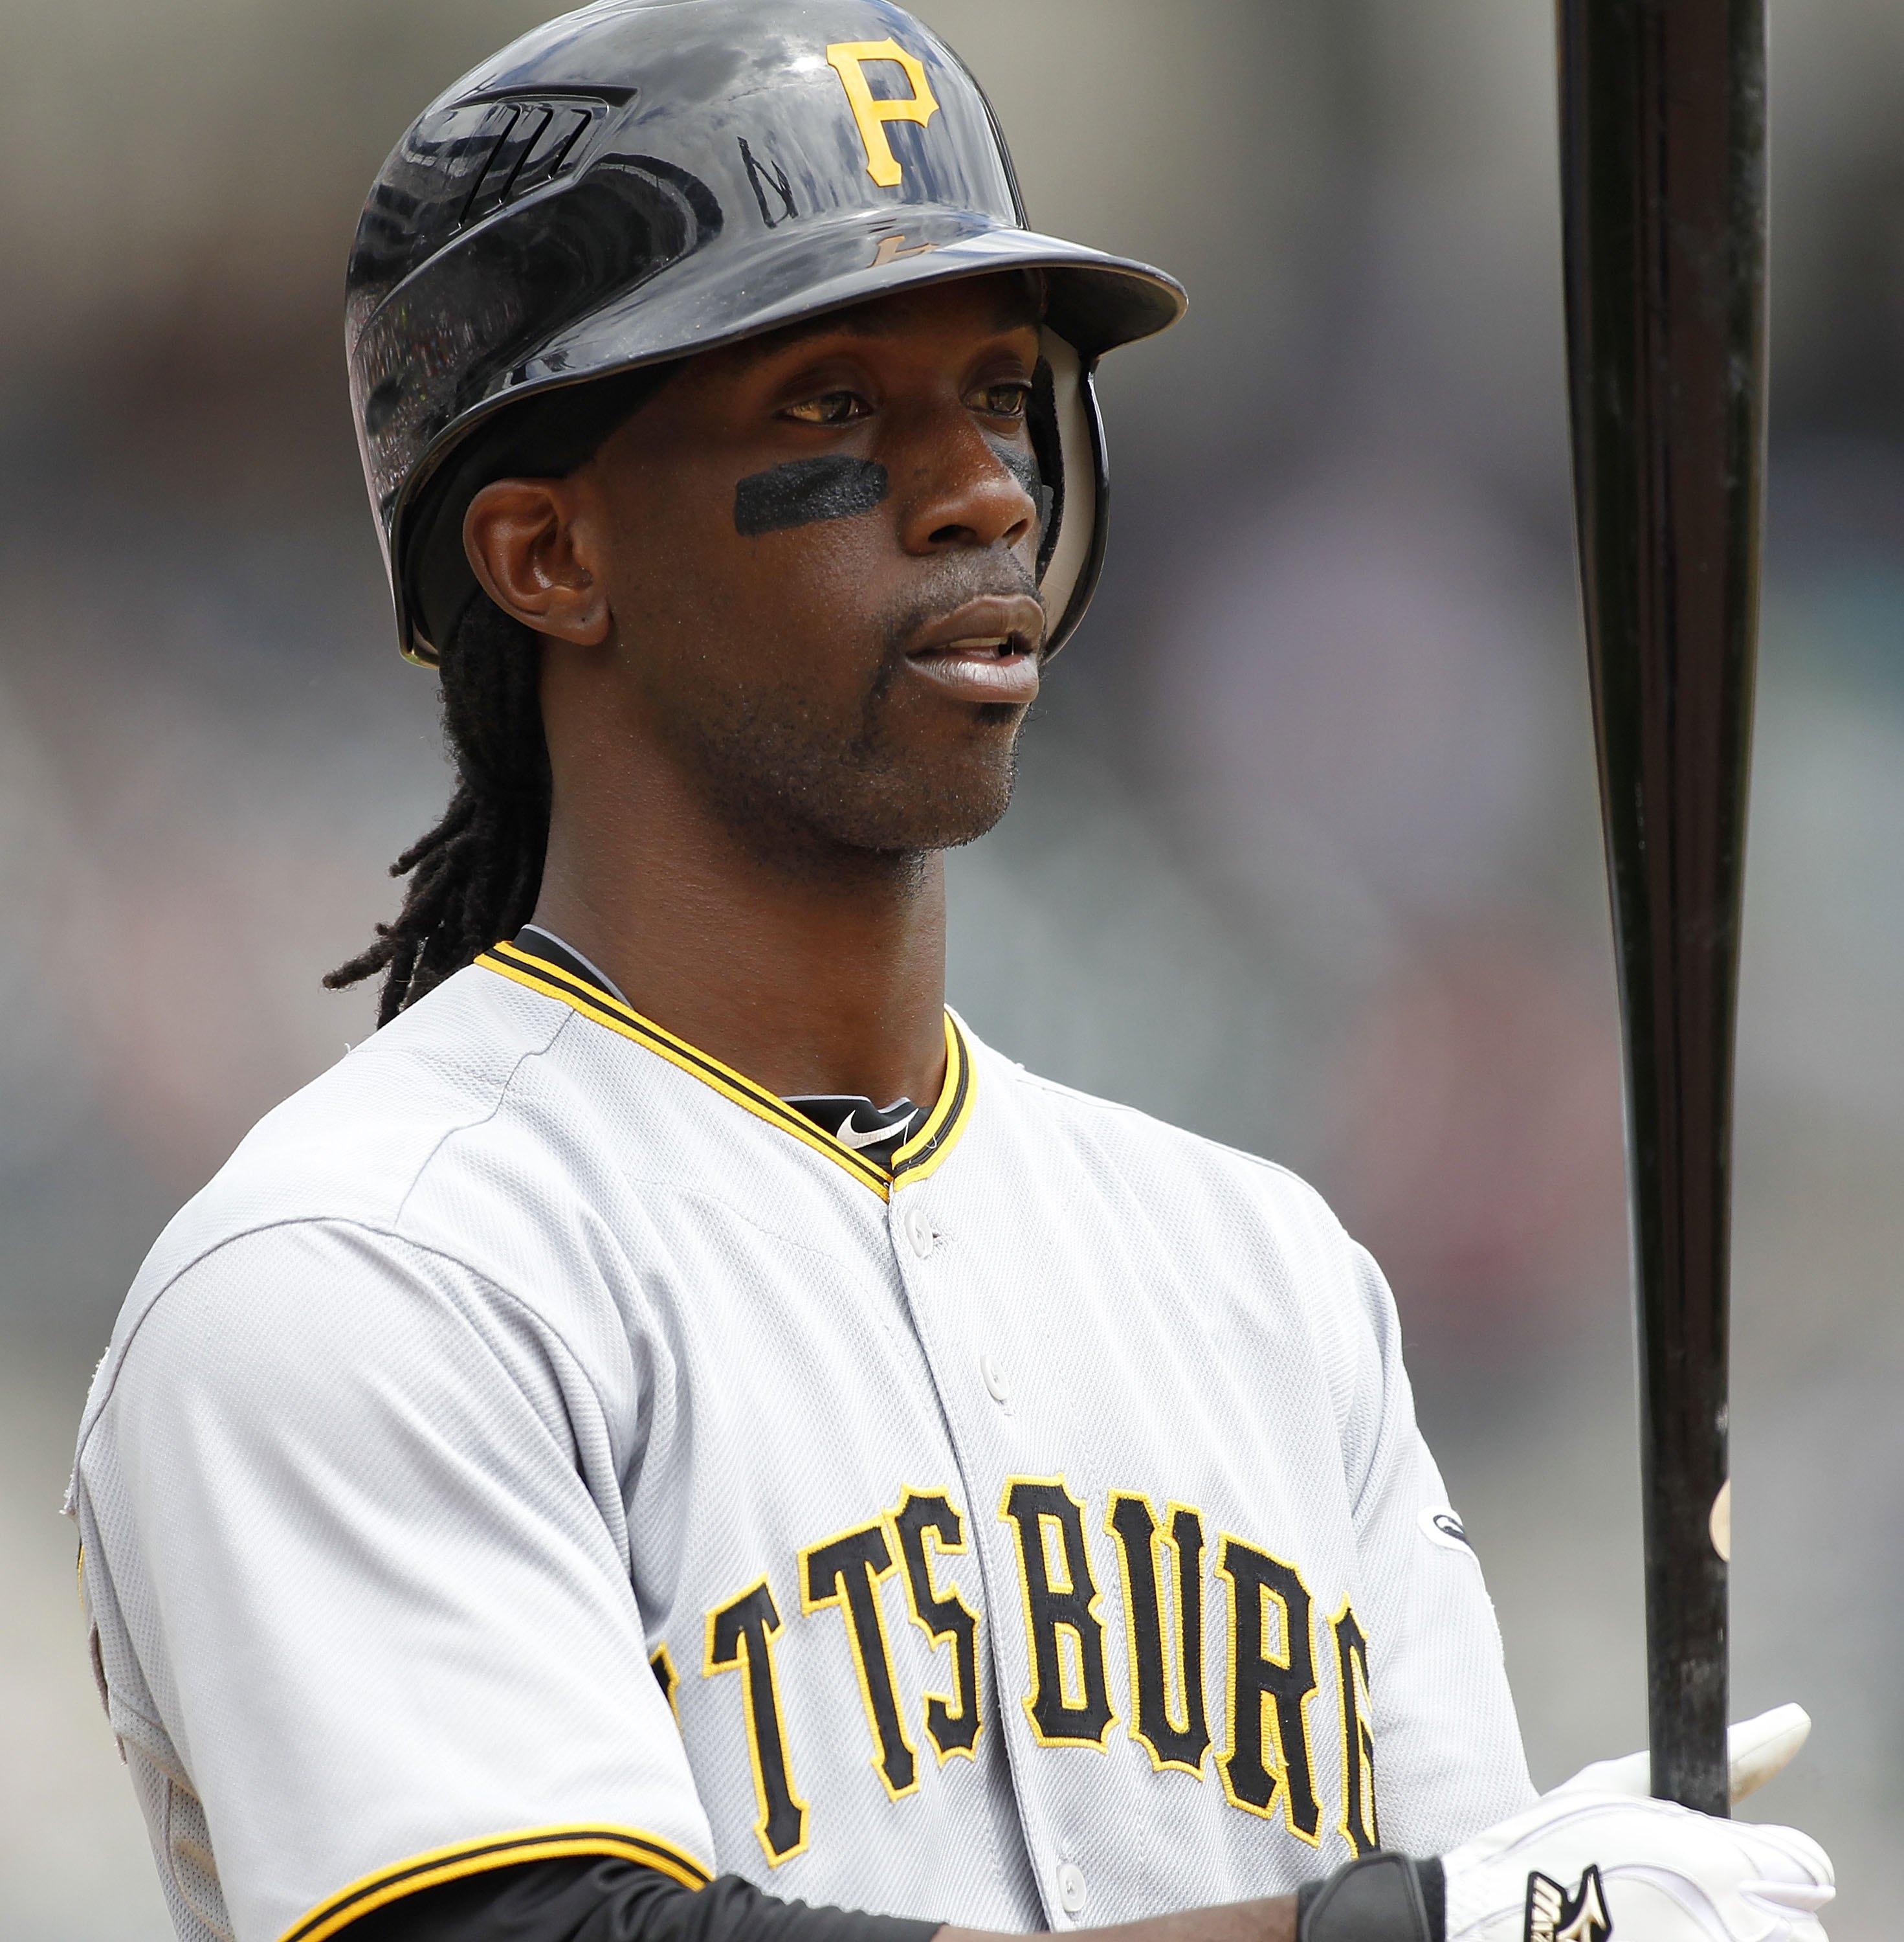 DETROIT - JUNE 13: Andrew McCutchen #22 of the Pittsburgh Pirates bats in the sixth inning against the Detroit Tigers during the game on June 12, 2010 at Comerica Park in Detroit, Michigan. The Tigers defeated the Pirates 4-3.  (Photo by Leon Halip/Getty